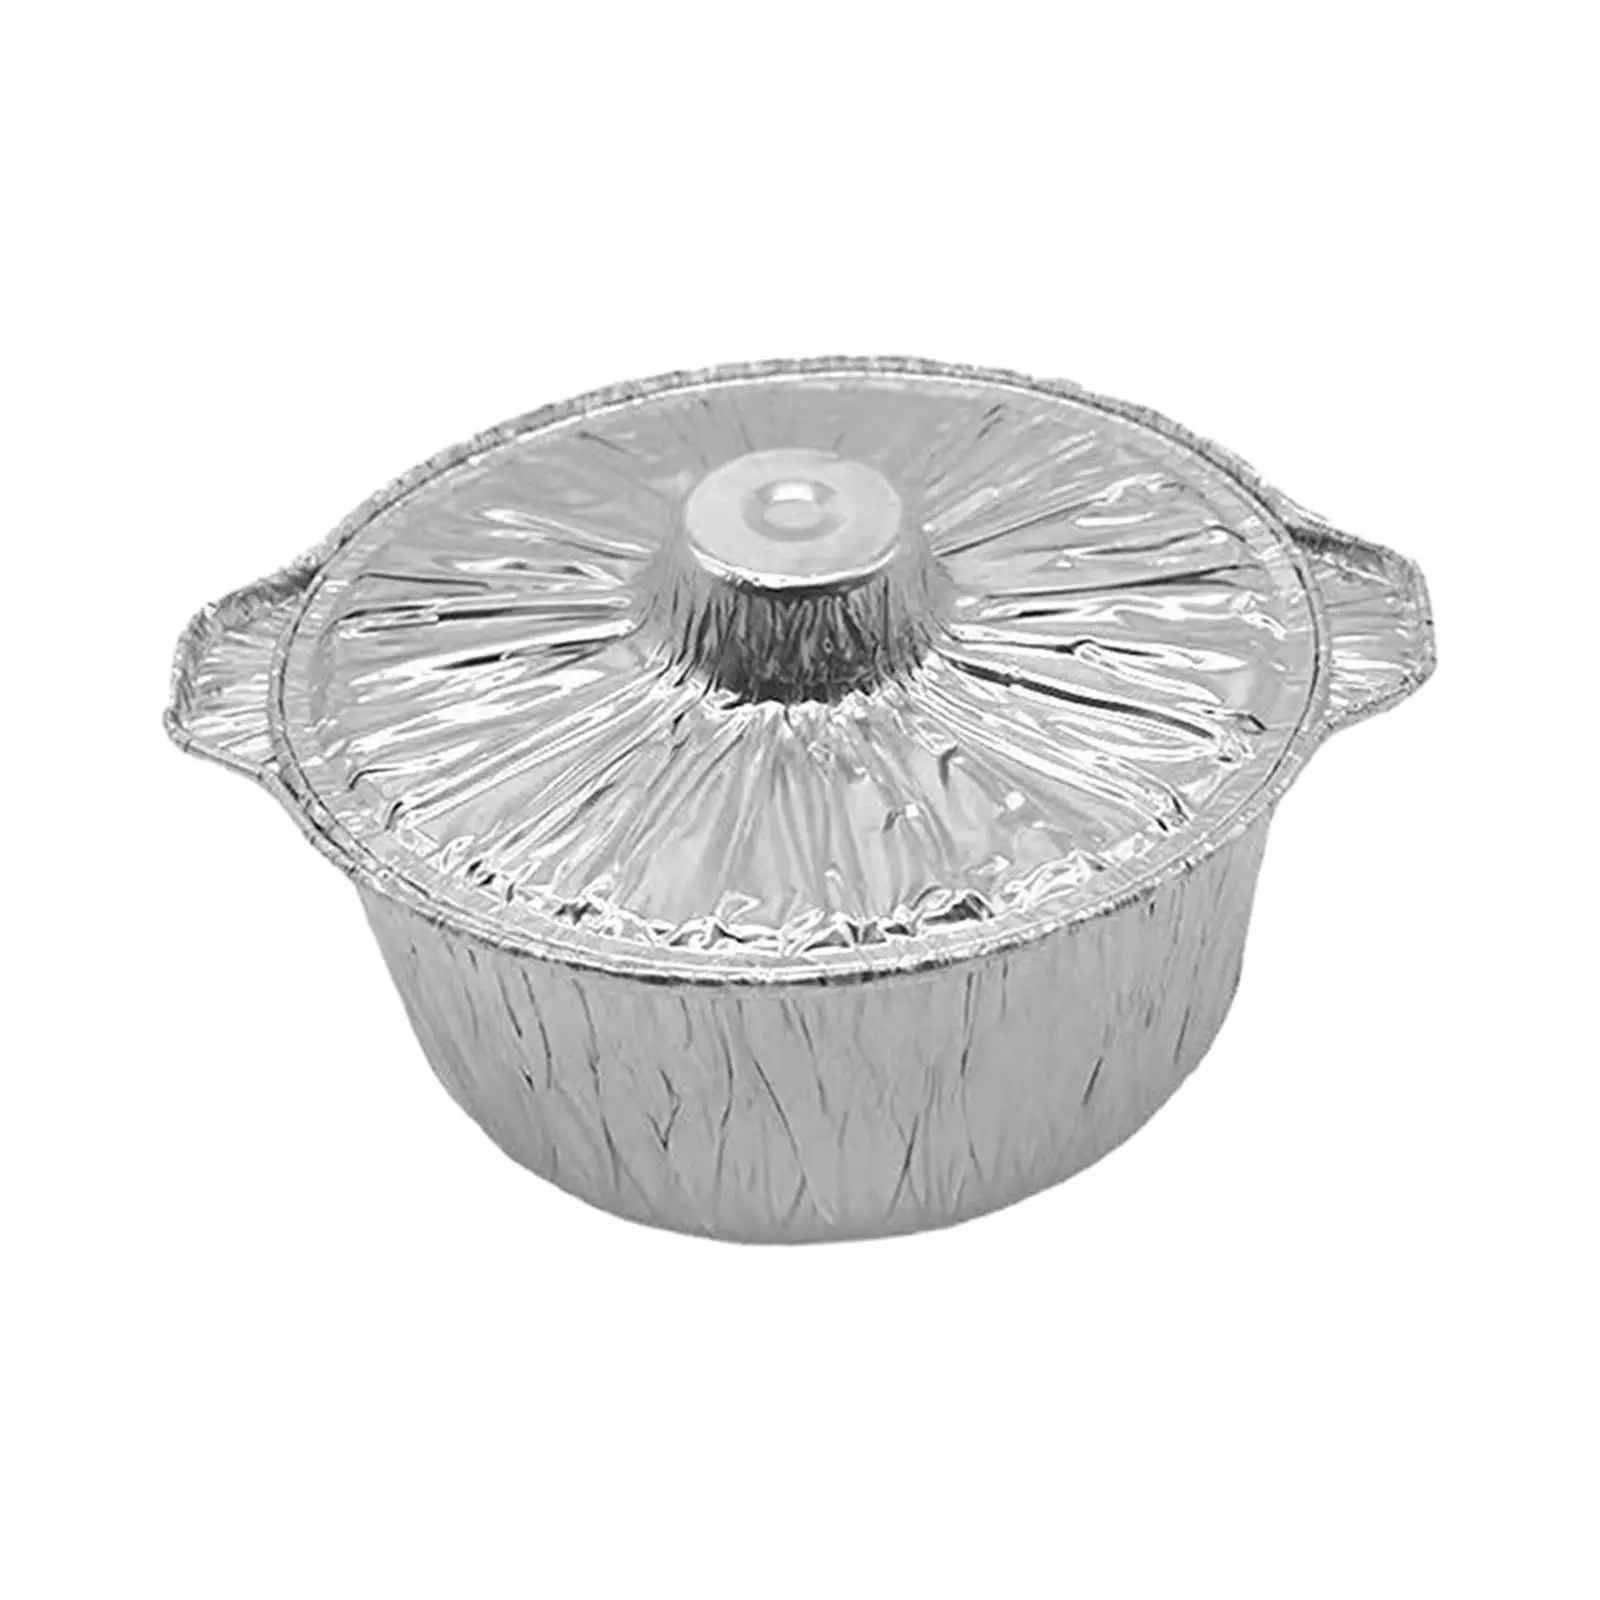 Foil Meat Pot with Lid Stockpot Pie Pan Hotpot Cake Pan Bakeware Cooking Hot Pot for Camping Home Restaurant Vacation Events